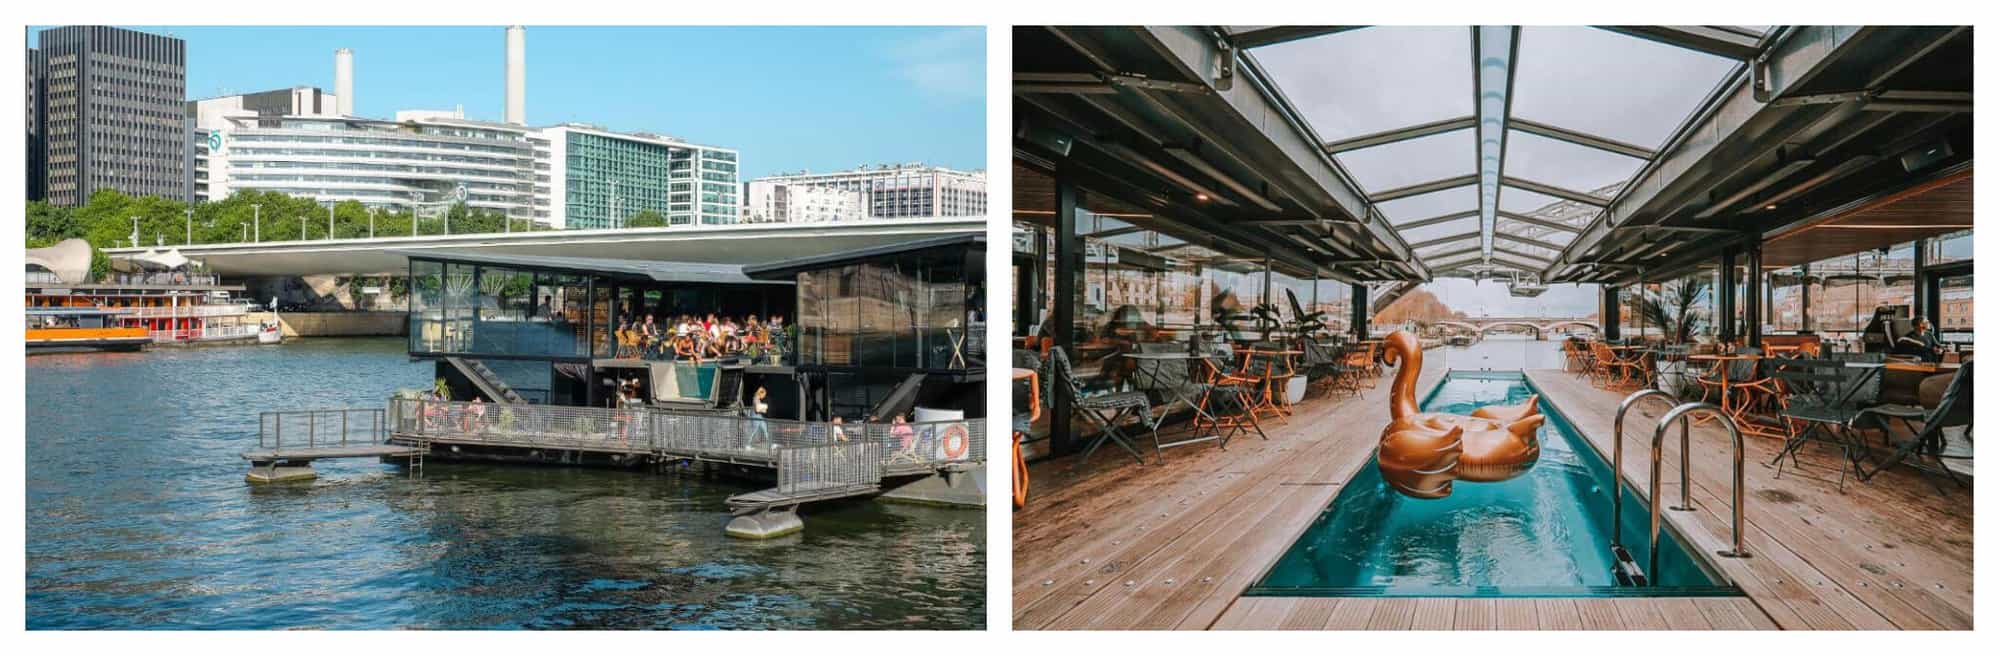 Left: A boat party by the river Seine. Right: A brown swan buoy floats in a blue vertical pool with wooden floors.